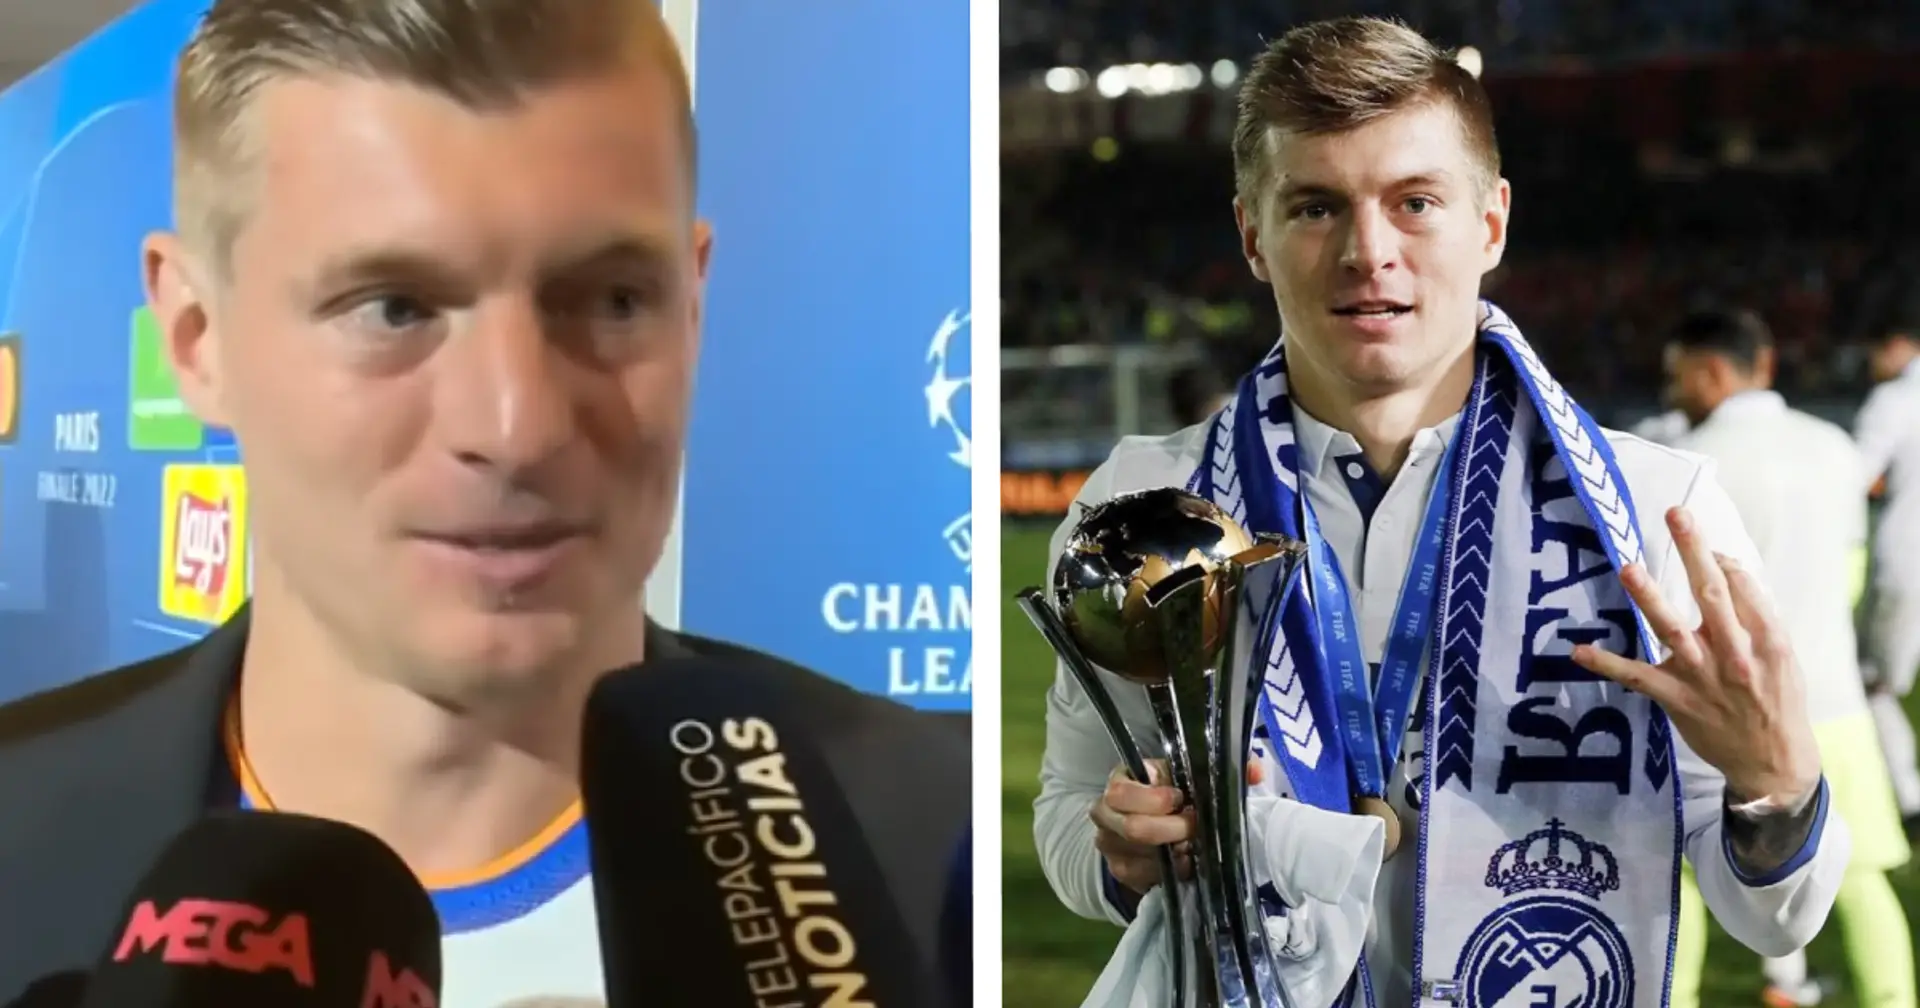 'It's different': Kroos claims Real Madrid play better when he starts with one player